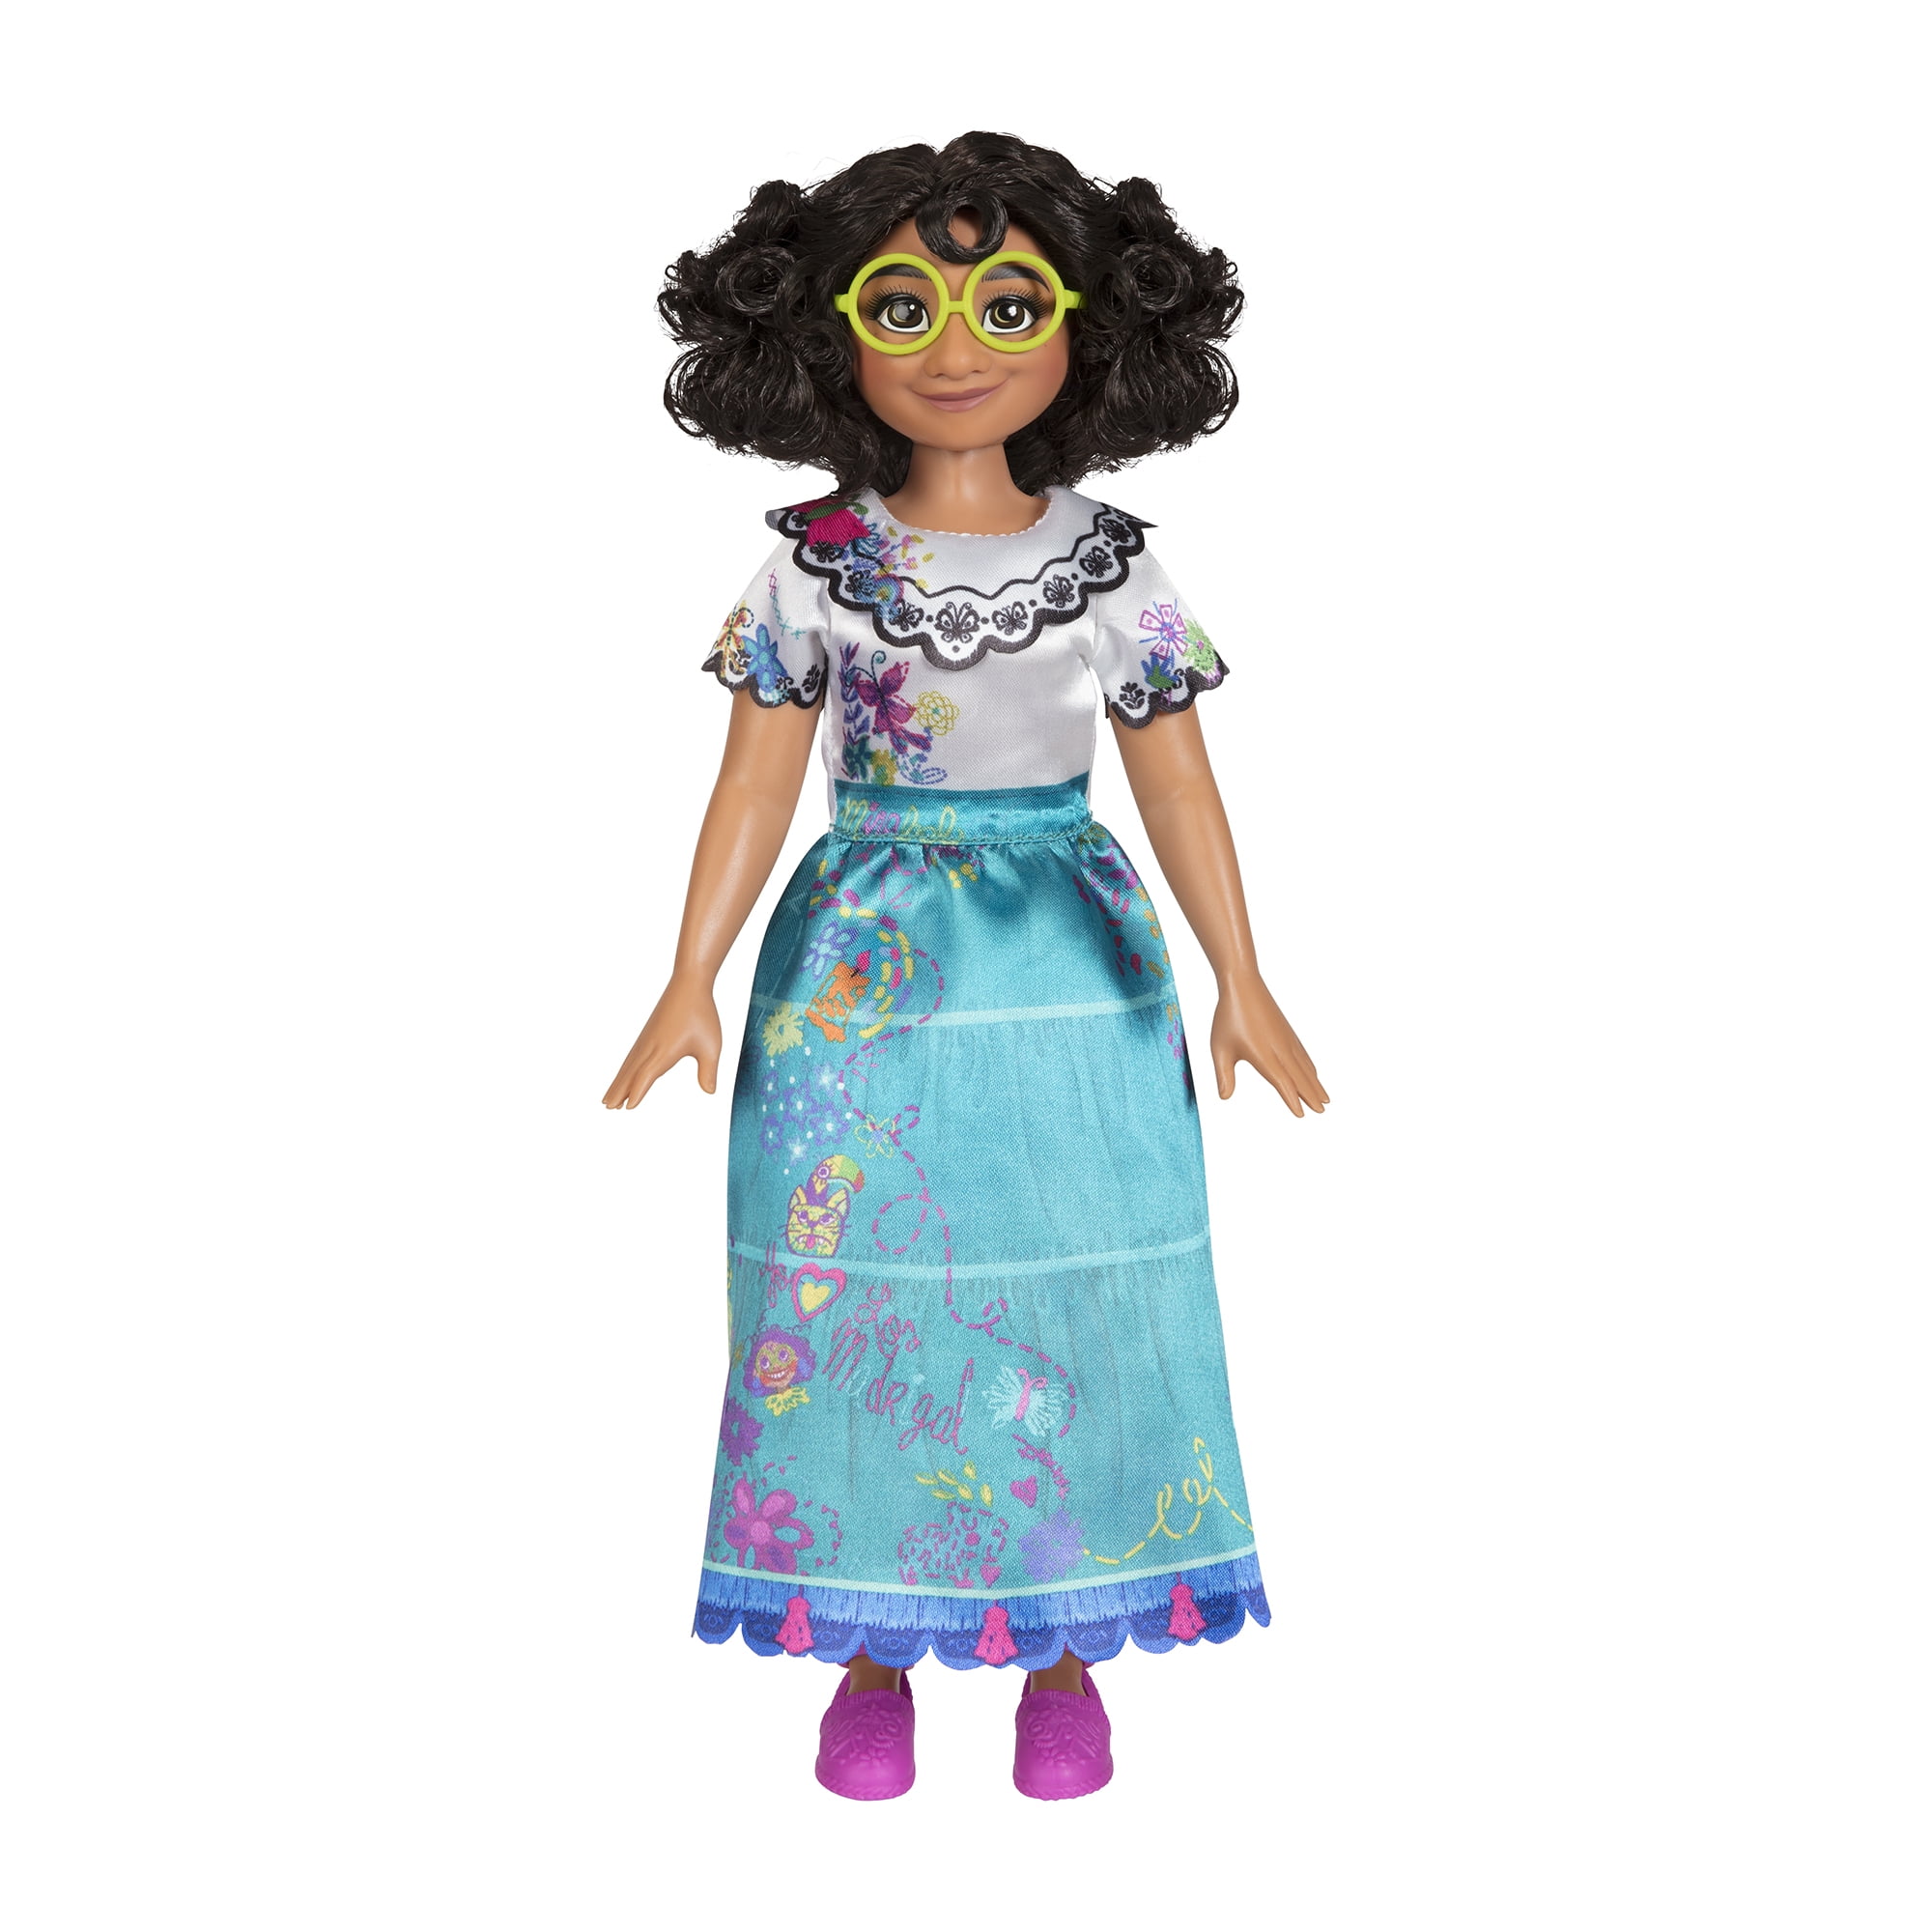 Disney Encanto Mirabel 11 inch Fashion Doll Includes Dress, Shoes and Hair Clip, for Children Ages 3+